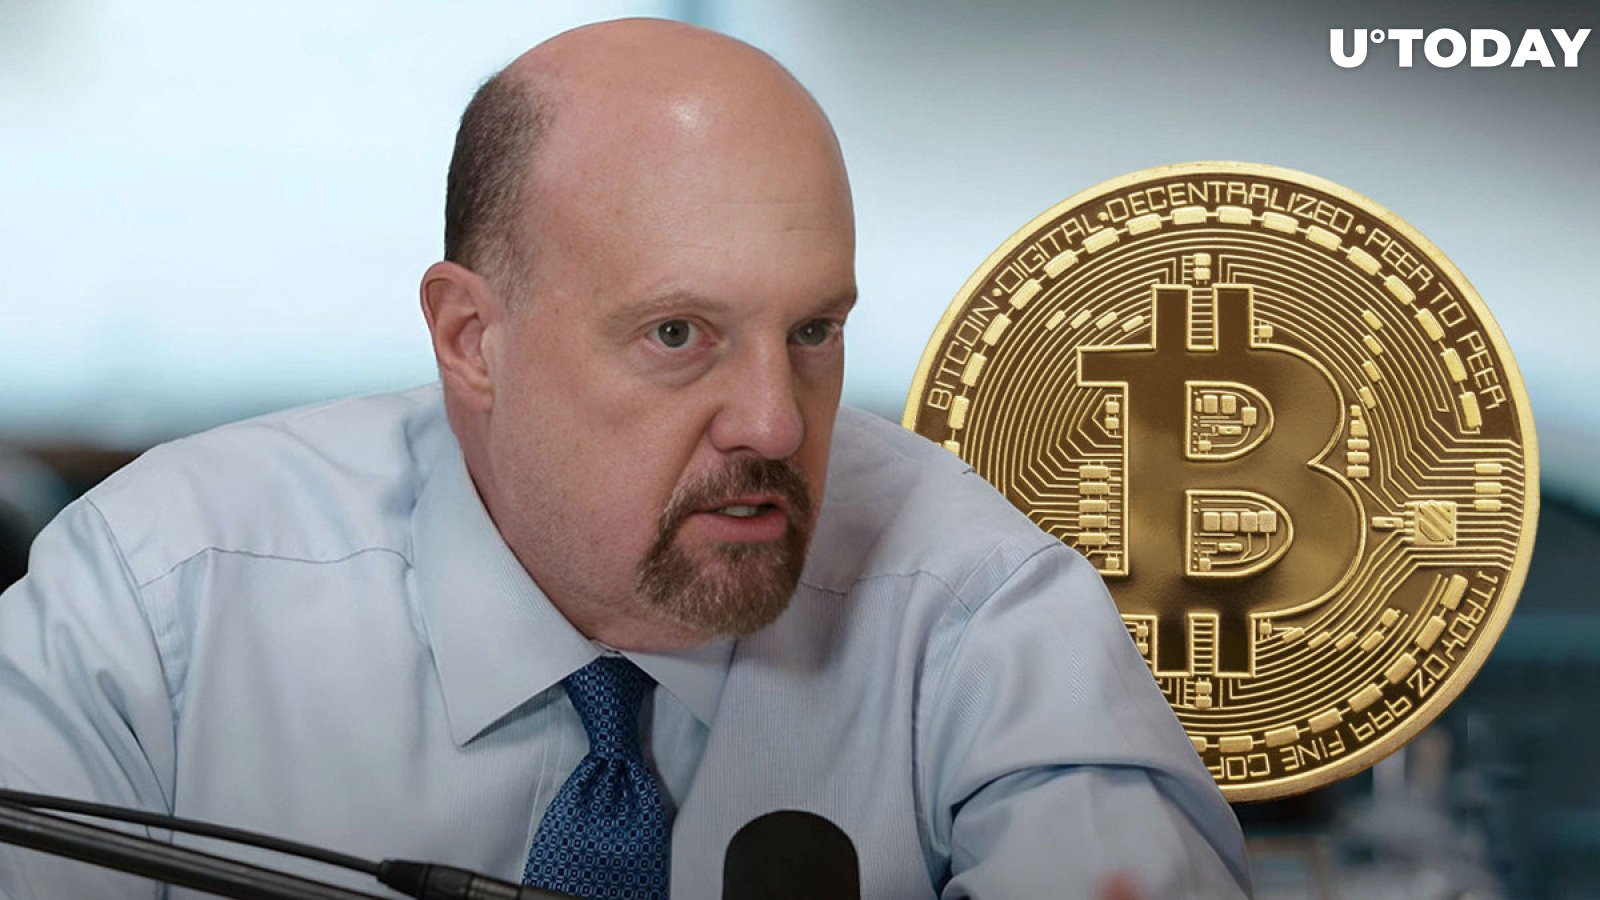 Bitcoin (BTC) up 40% Since Jim Cramer's 'Sell' Recommendation: Details